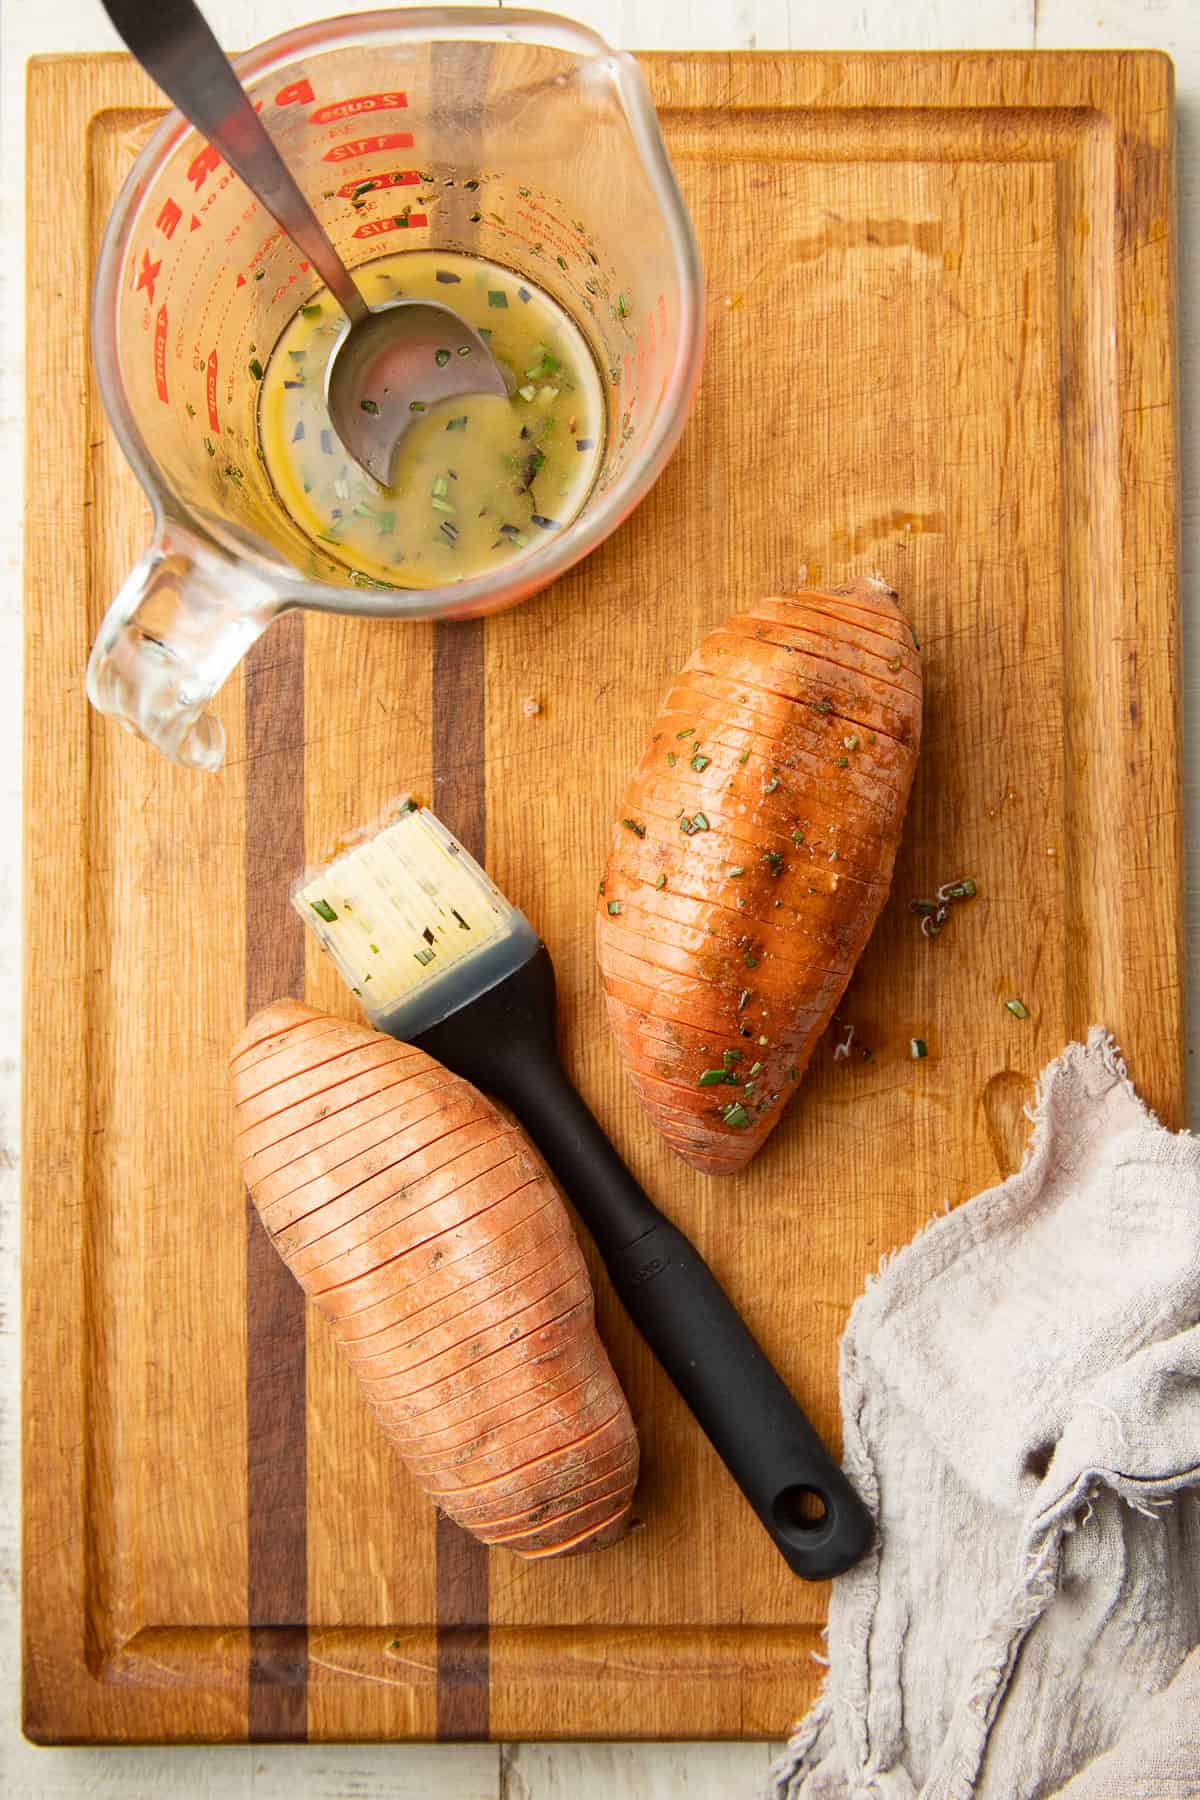 Cutting board with two uncooked Hasselback Sweet Potatoes, basting brush, and measuring cup filled with rosemary butter.